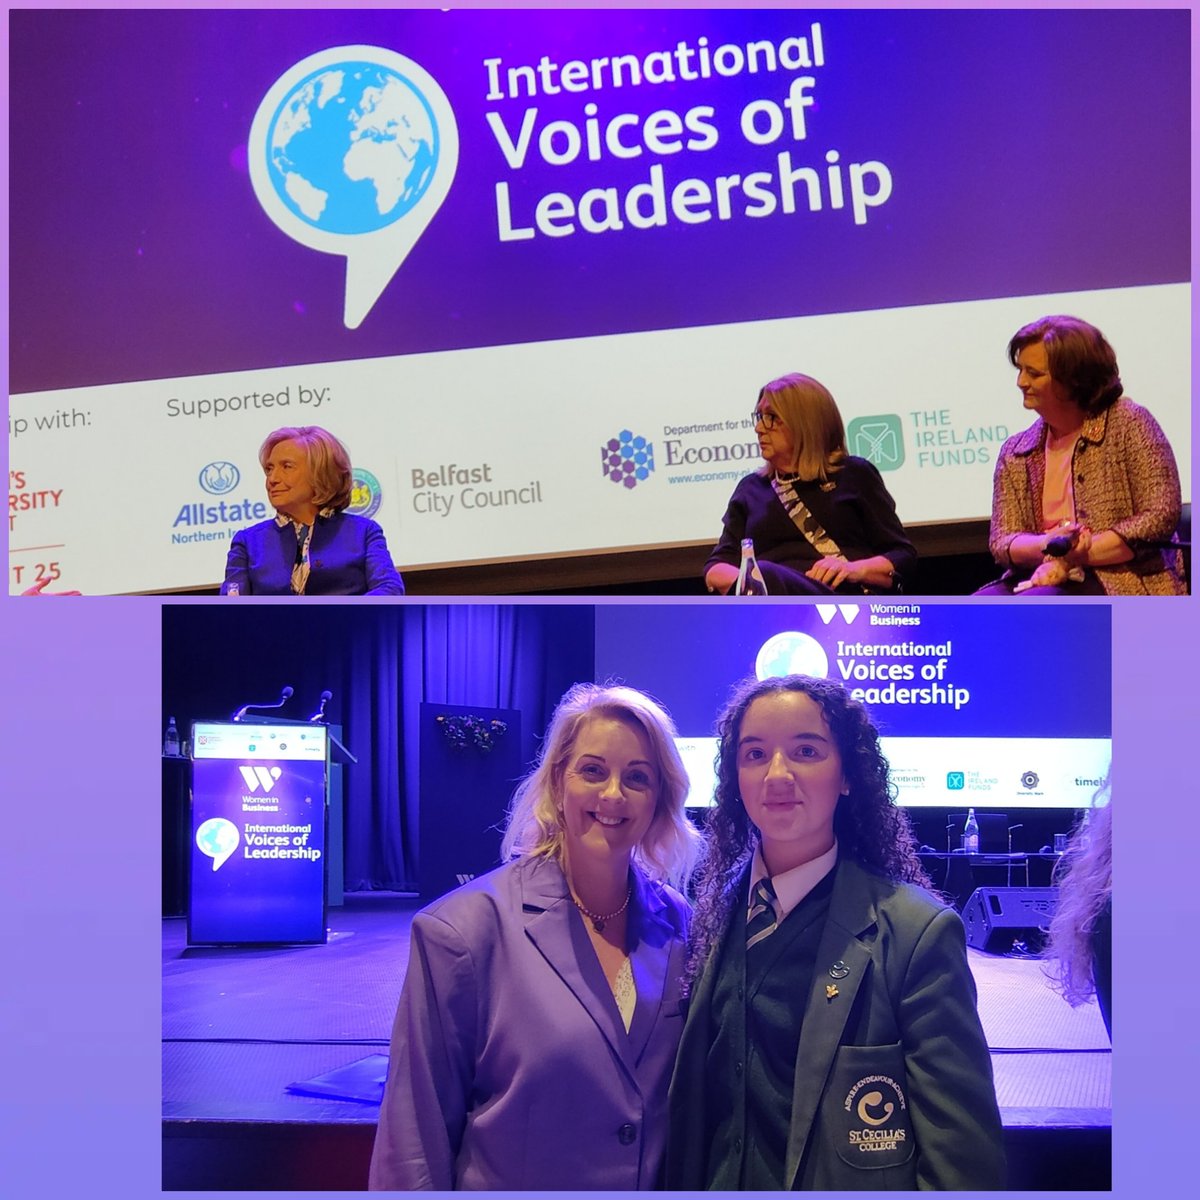 What an honour for Darragh @StCeciliasDerry and all the @SistersIN_HQ pupils to hear the leadership stories of these amazing female leaders. Thank you for your advice & inspiration Secretary @hillaryClinton, Professor Mary McAleese, Former President of Ireland & @CherieBlairKC